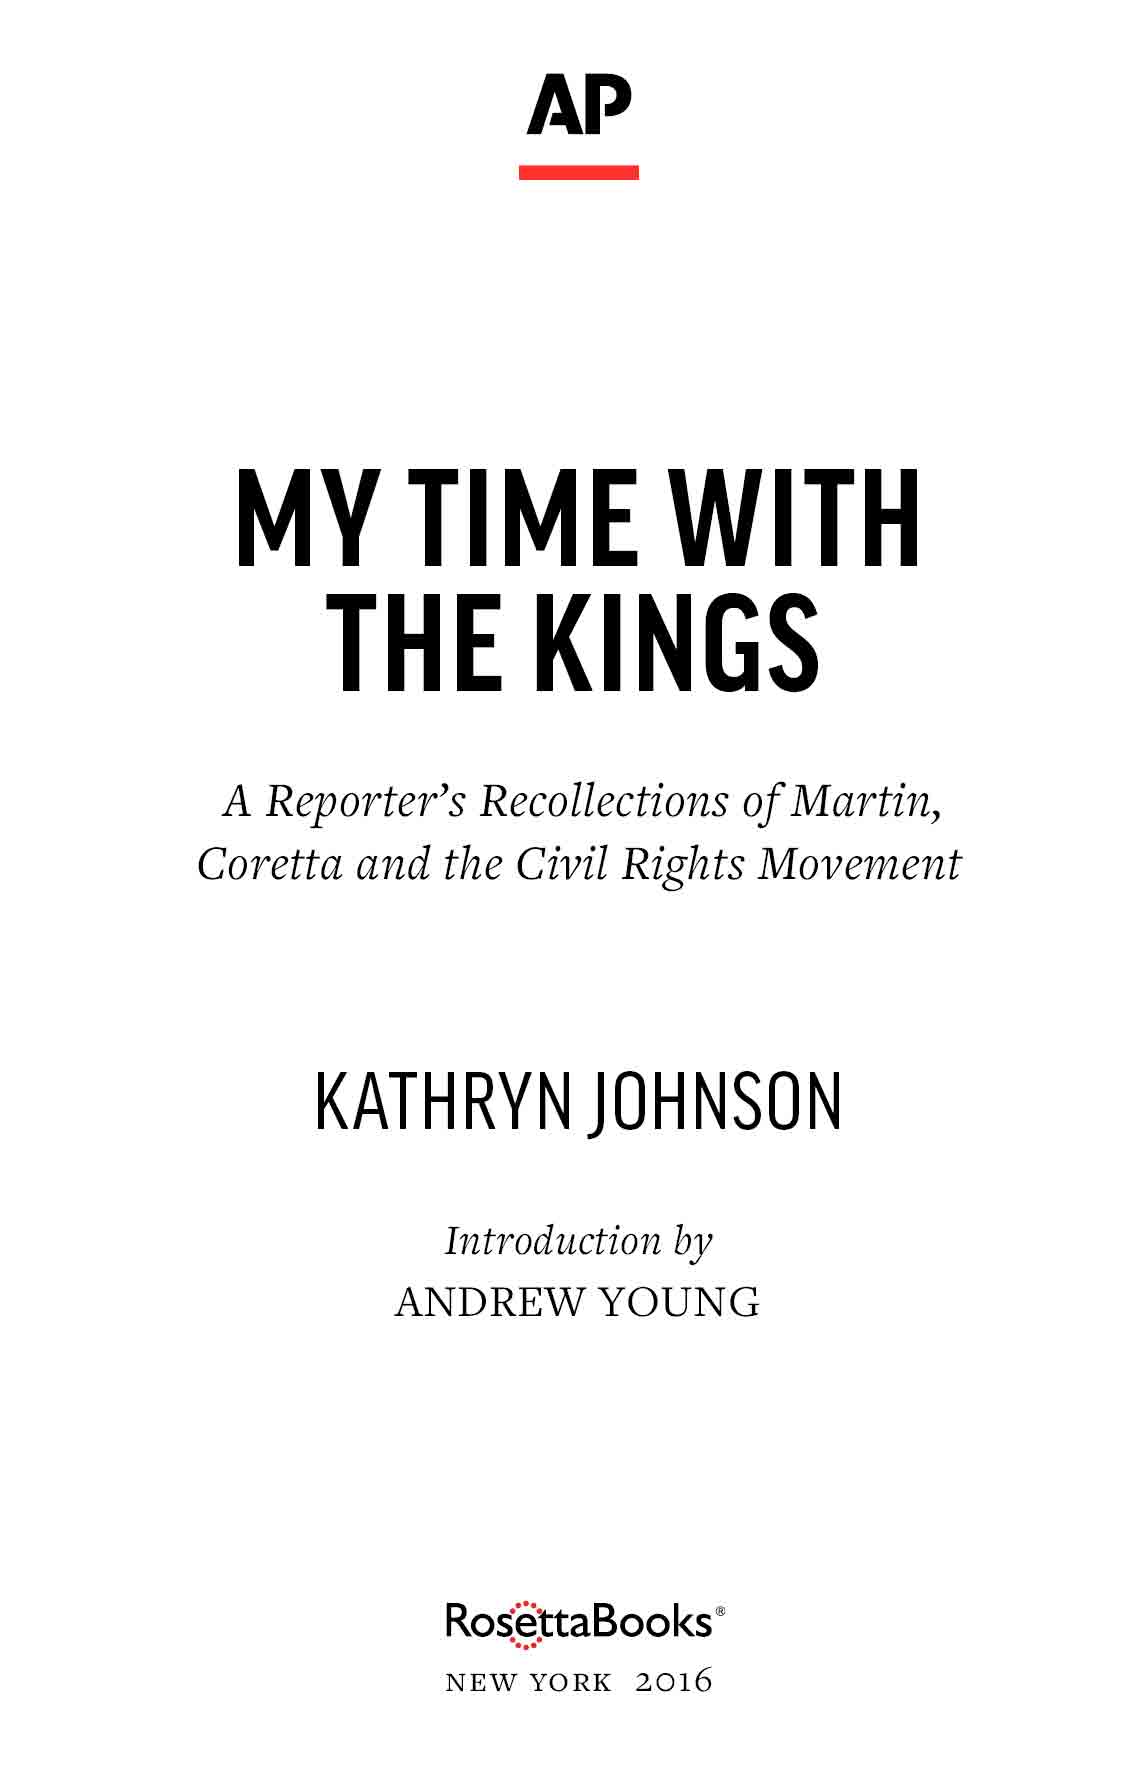 title page: My Time with the Kings: A Reporter's Recollections of Martin, Coretta and the Civil Rights Movement, by Kathryn Johnson. Introduction by Andrew Young. Published 2015 by The Associated Press and RosettaBooks, New York, NY.